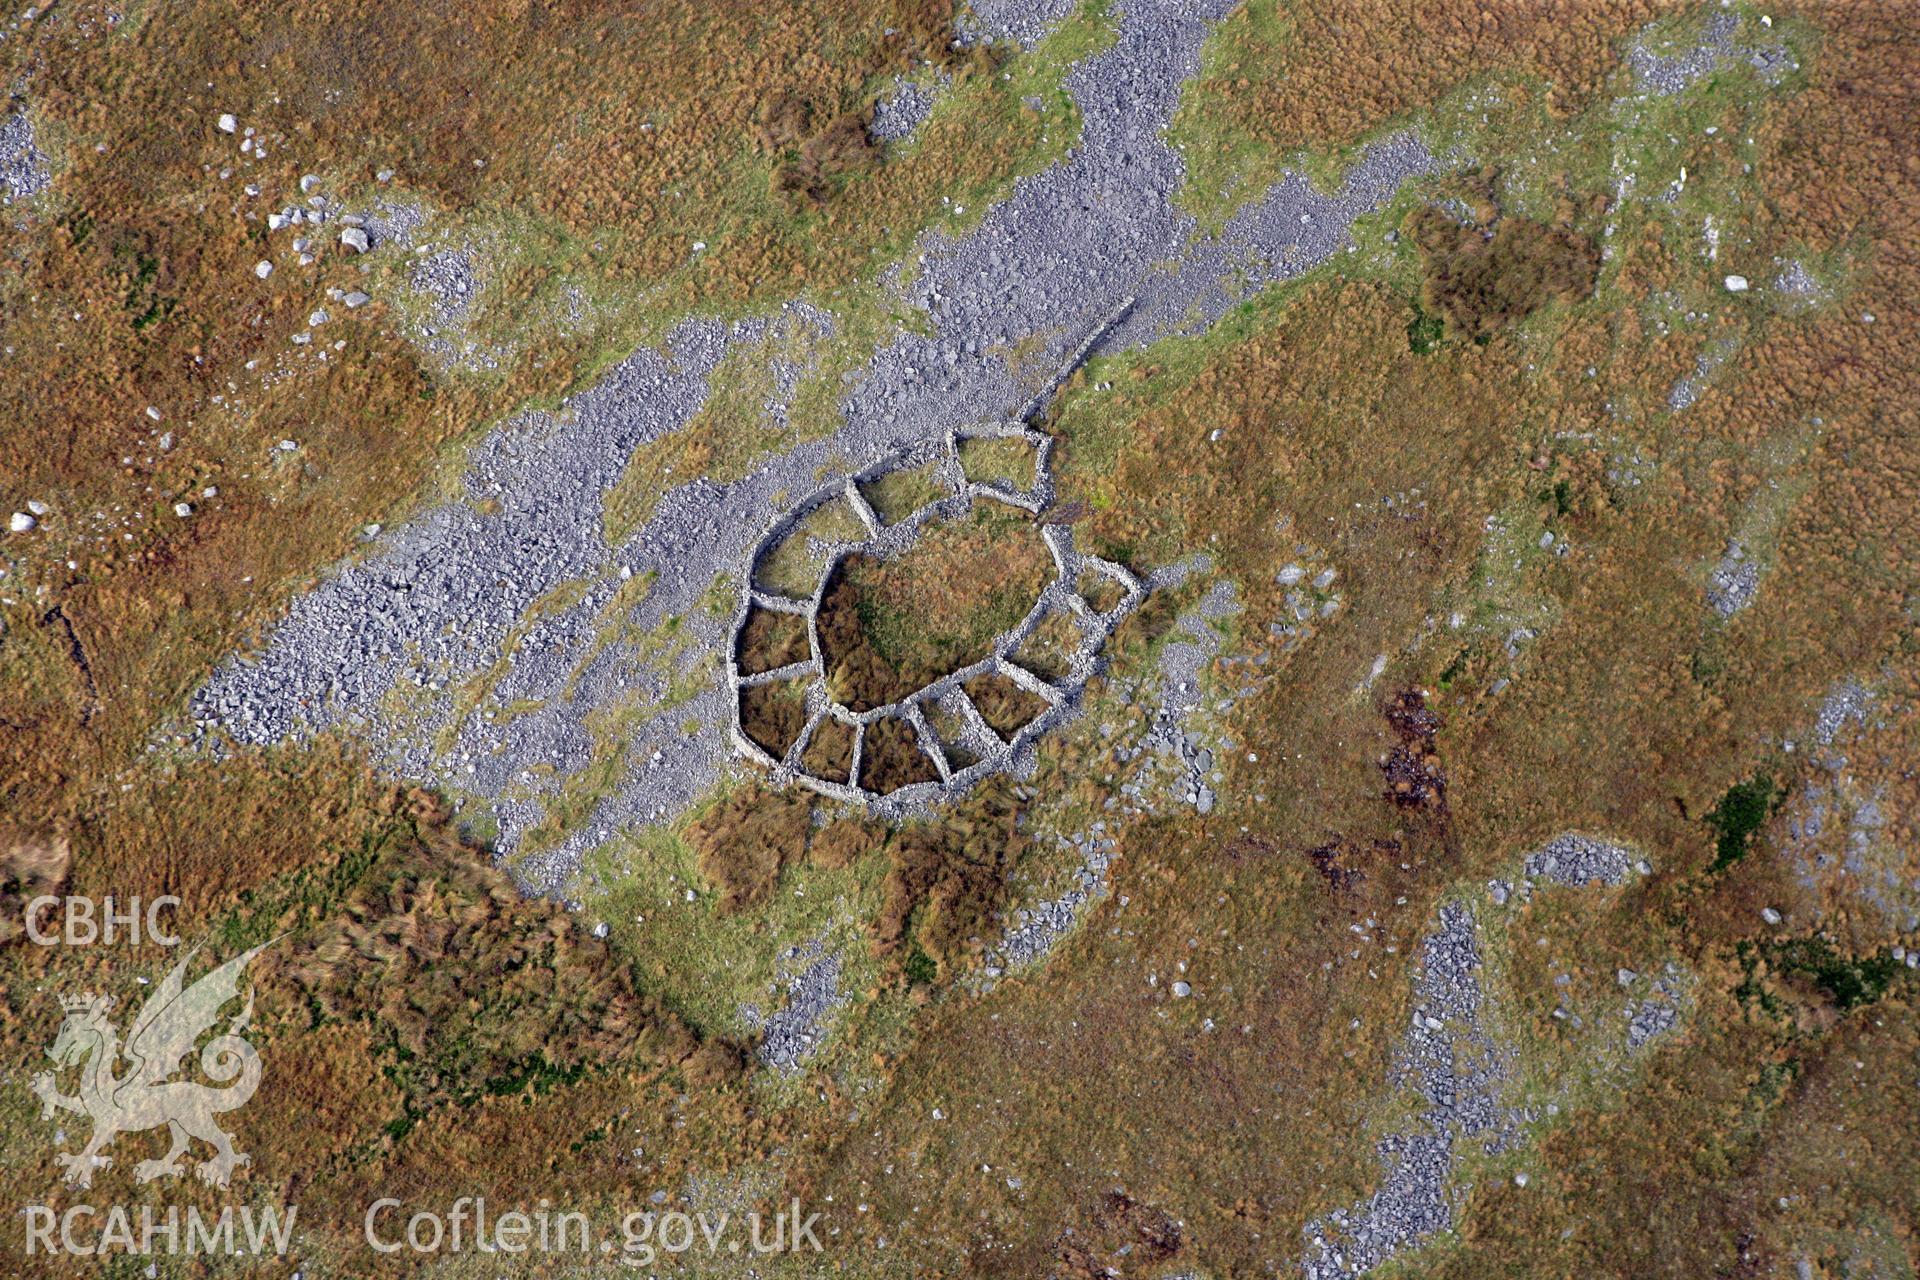 RCAHMW colour oblique aerial photograph of a multi-cellular sheepfold at Dorwen Ar Giedd. Taken on 14 October 2009 by Toby Driver